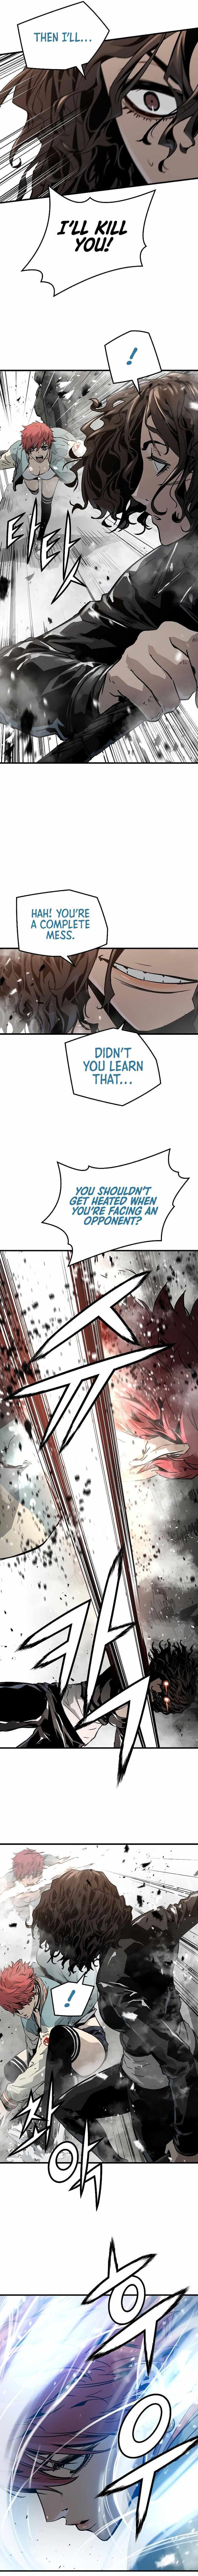 The Breaker: Eternal Force Chapter 61 page 17 - 